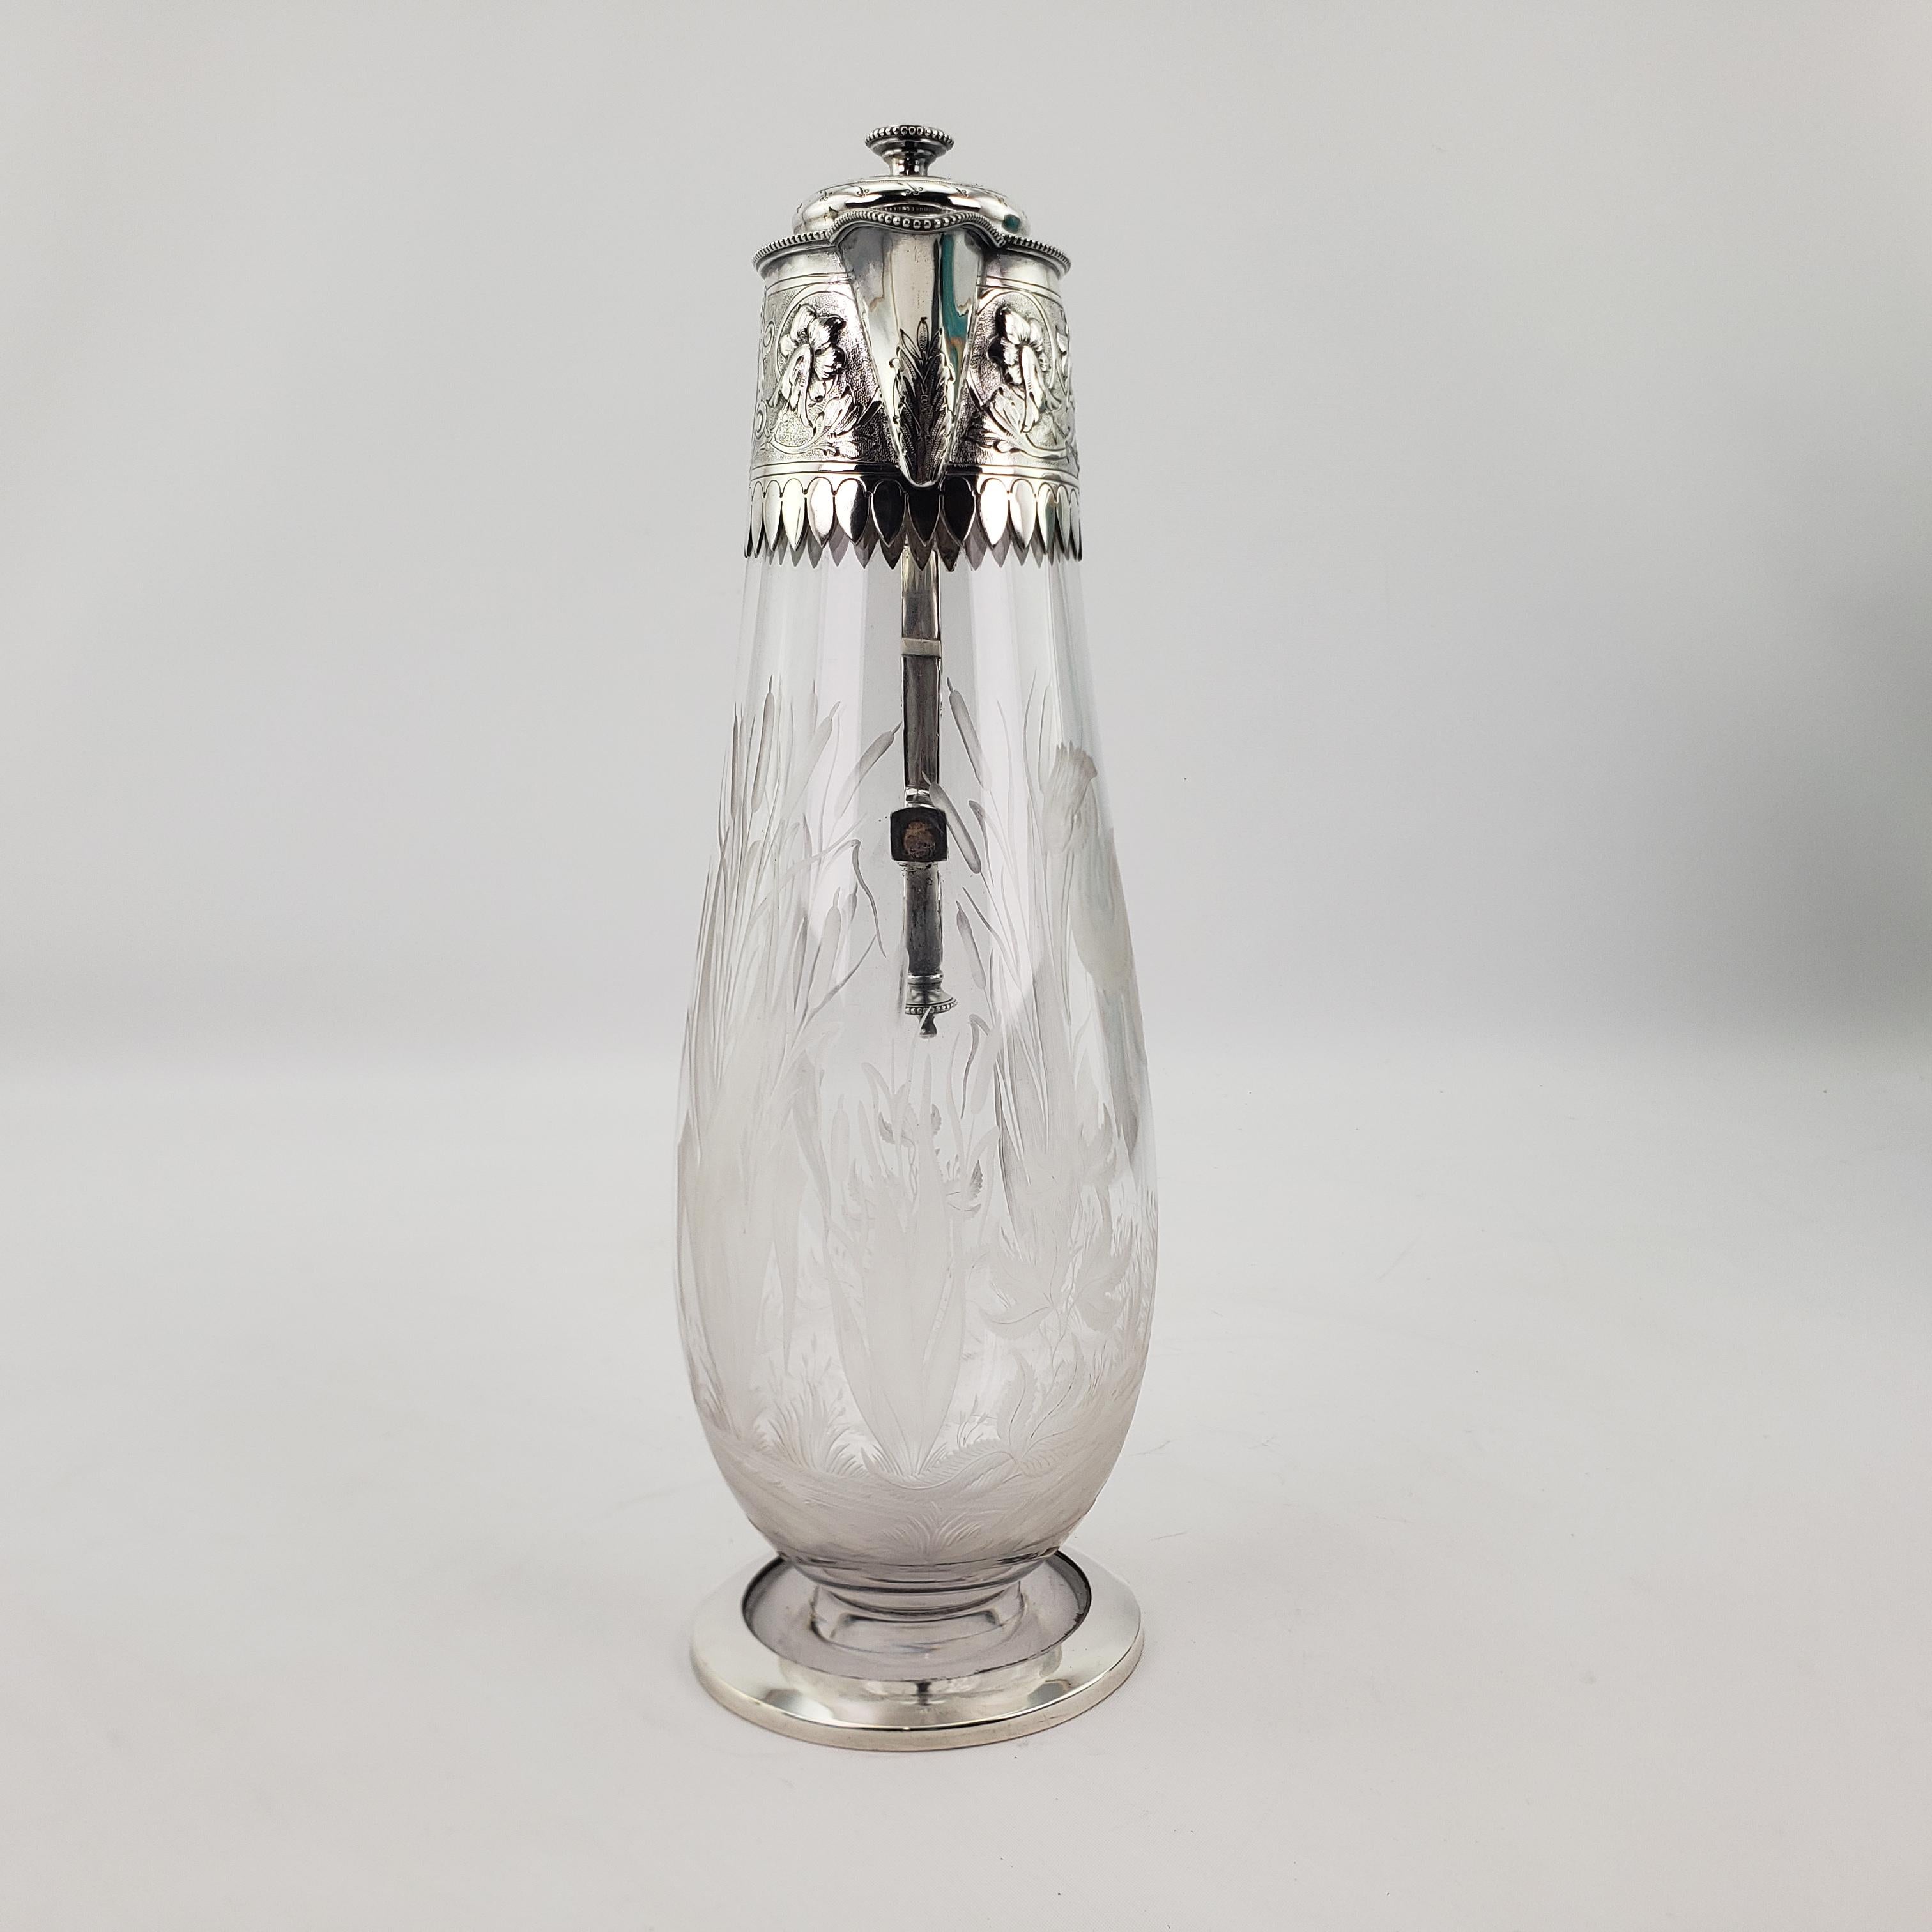 Antique Elkington Silver Plated Claret Jug with Etched Shore Bird & Cattails In Good Condition For Sale In Hamilton, Ontario